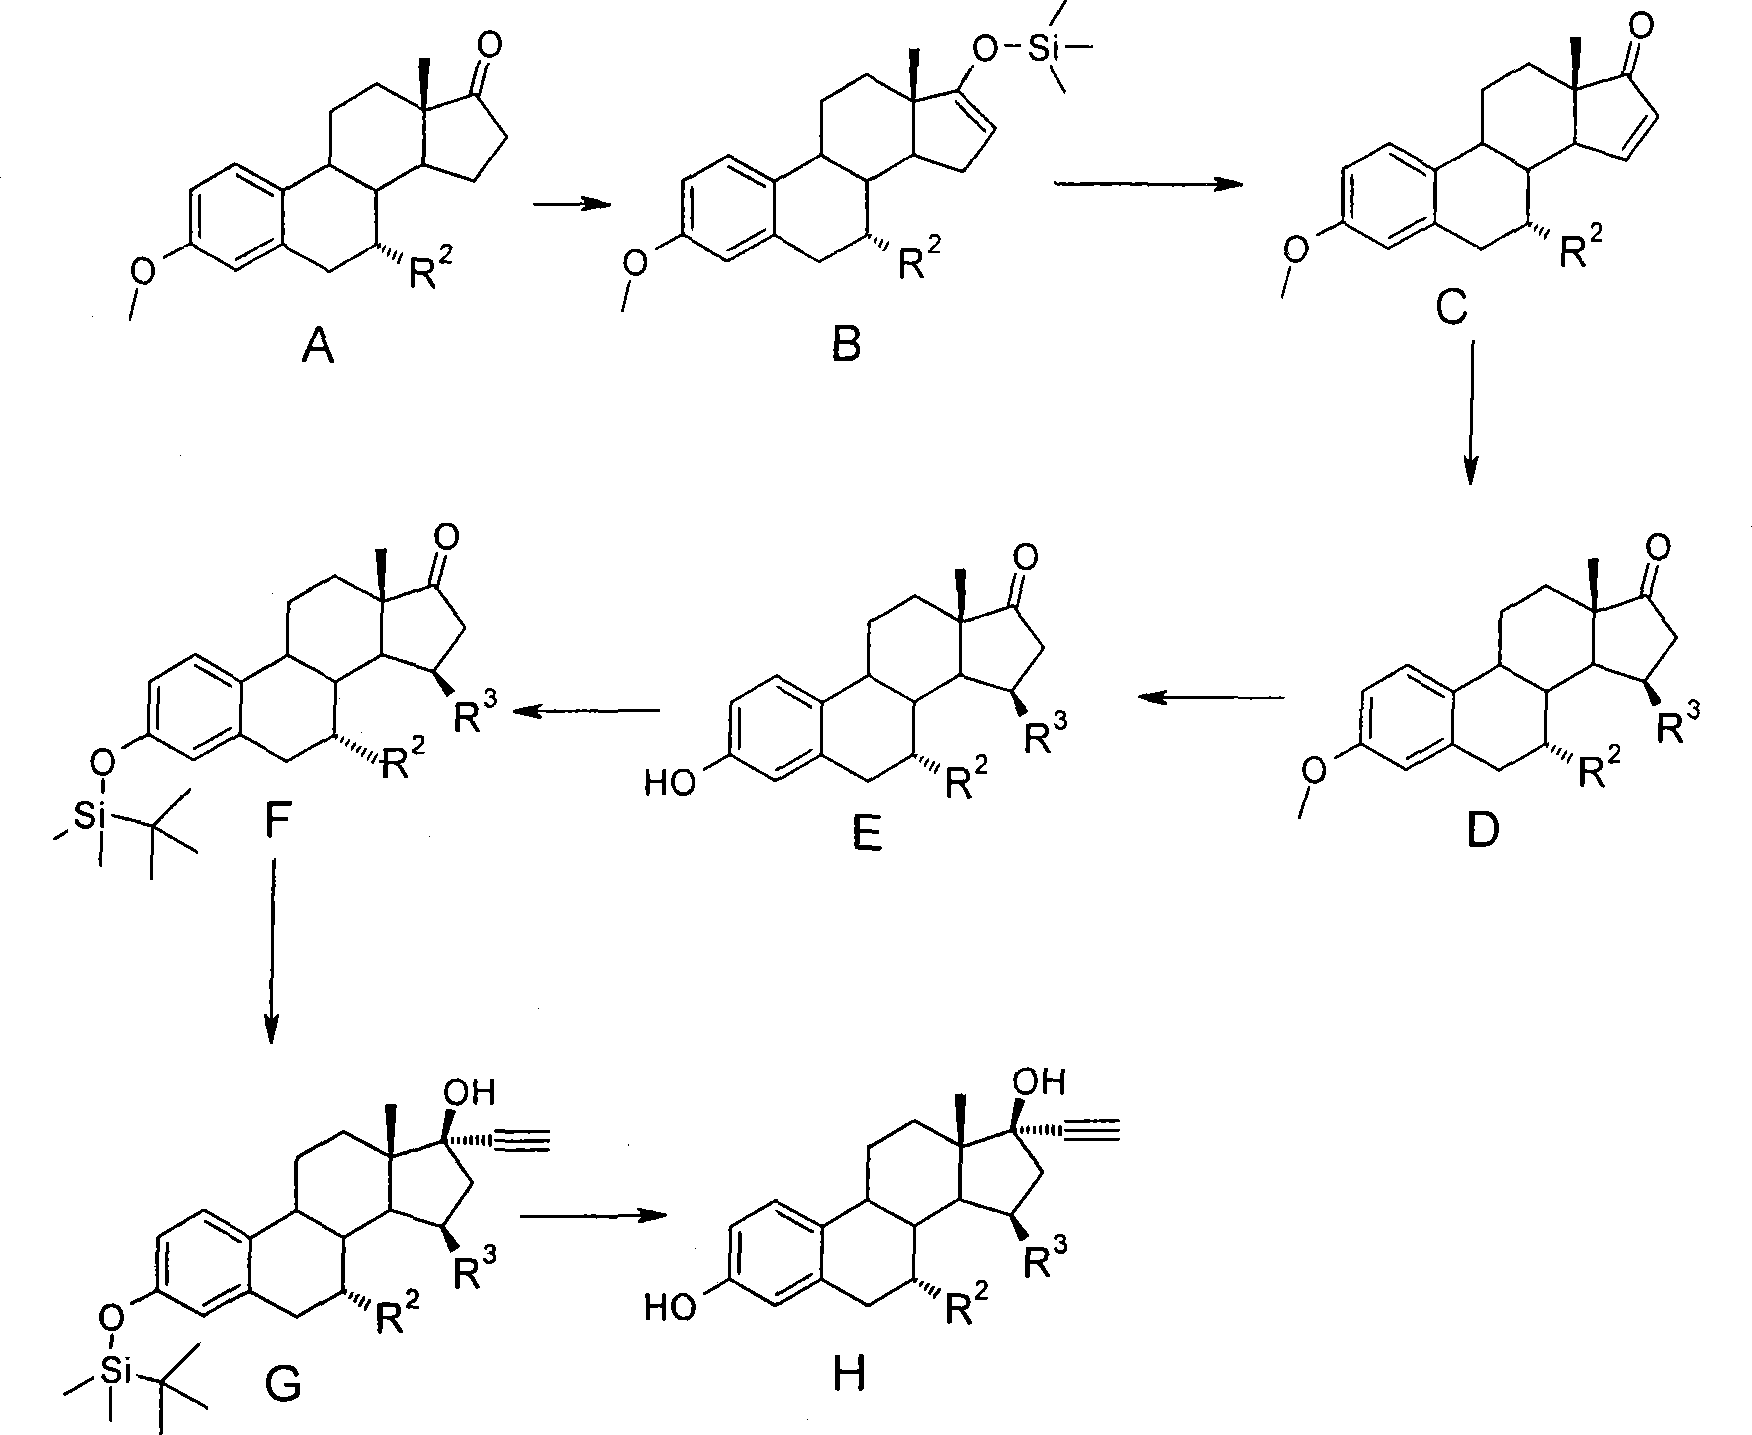 15beta-substituted steroids having selective estrogenic activity